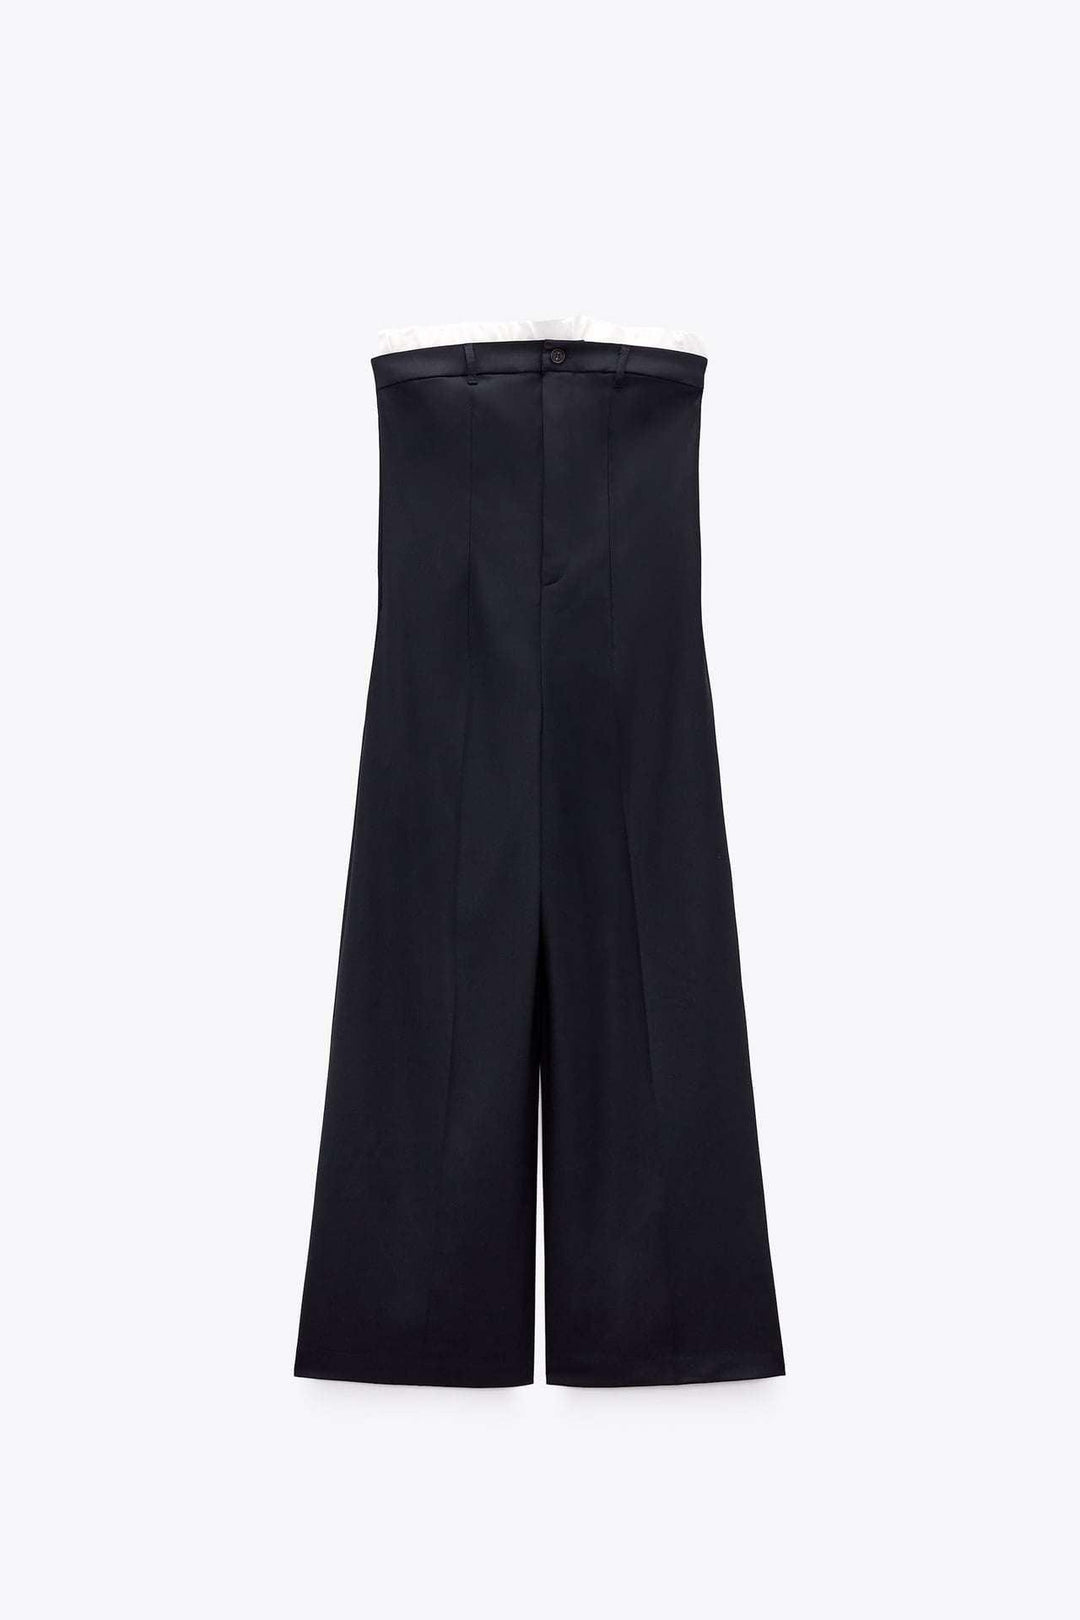 Contrast Color Off-neck Tube Top Jumpsuit Stitching Wide Leg - Trendha